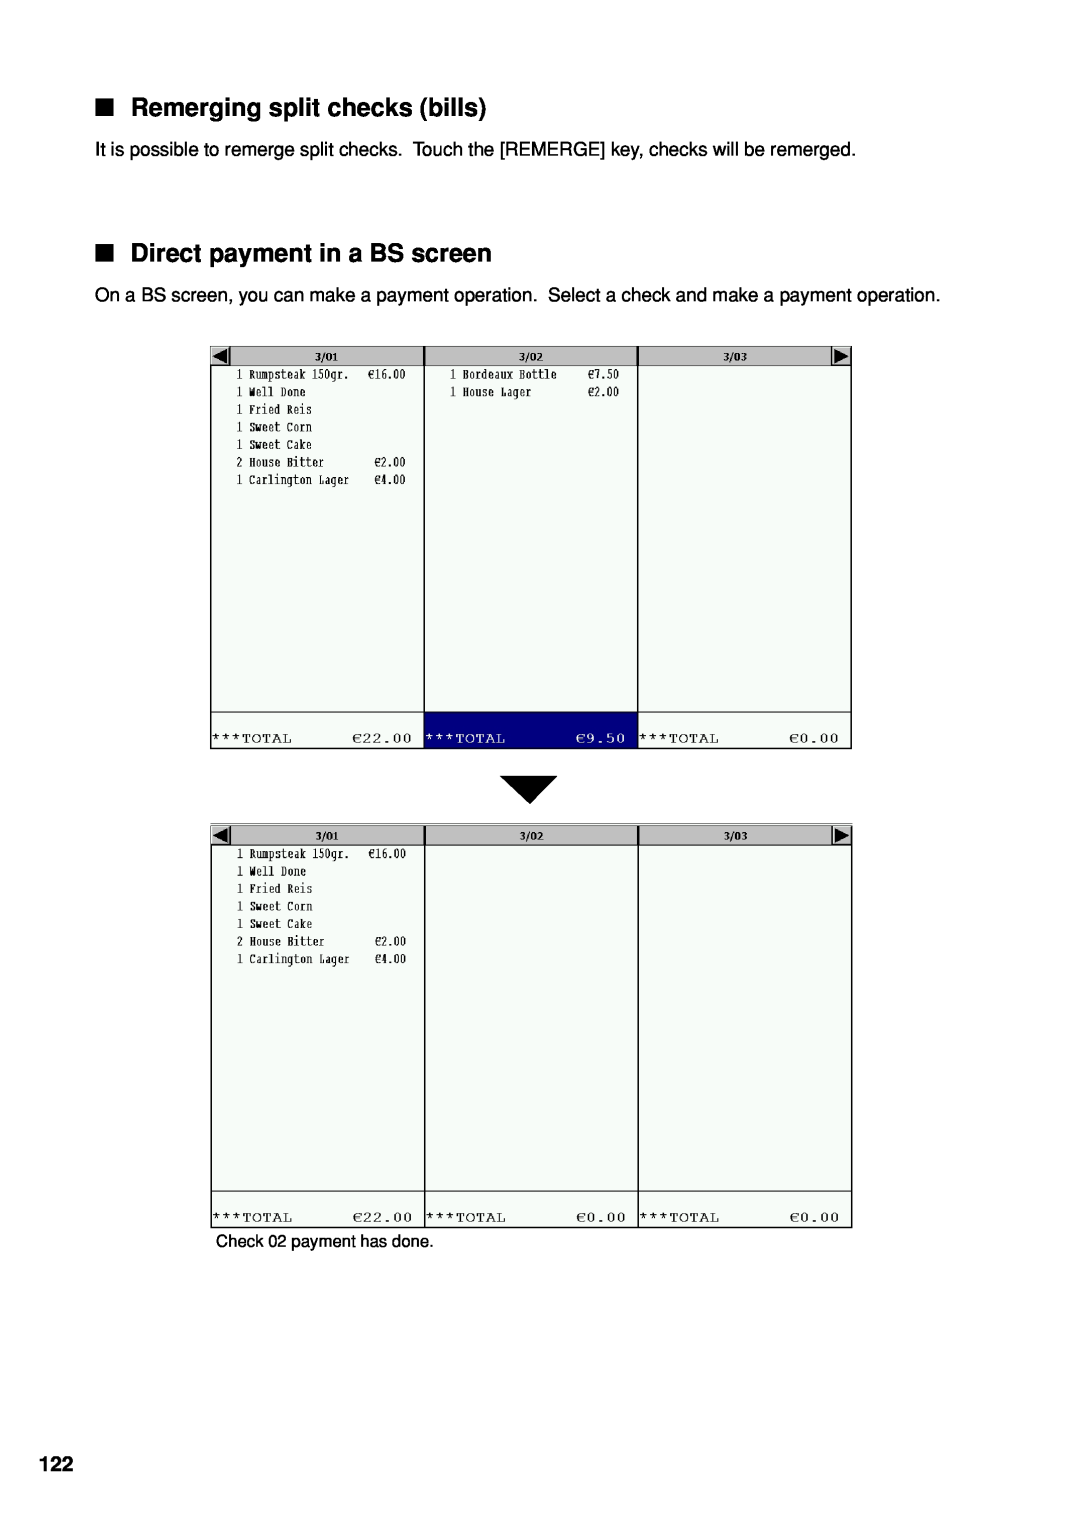 Sharp UP-X300 instruction manual Remerging split checks bills, Direct payment in a BS screen, Check 02 payment has done 